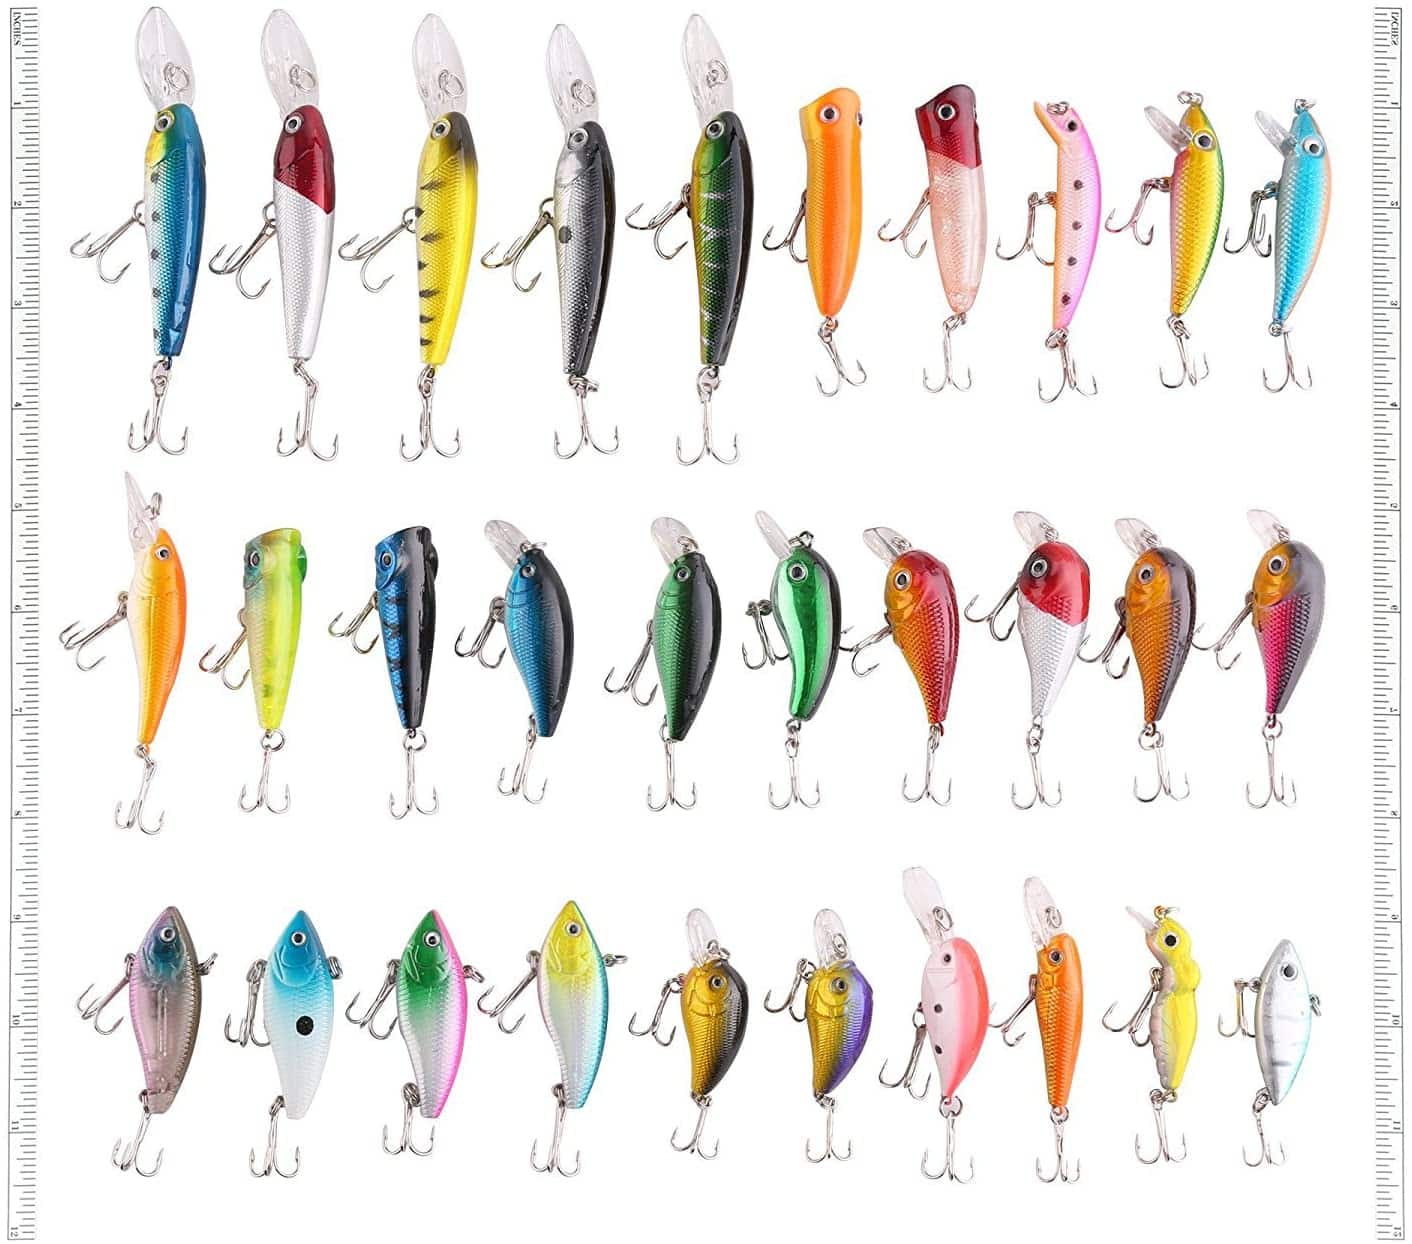 Lures used for spin fishing